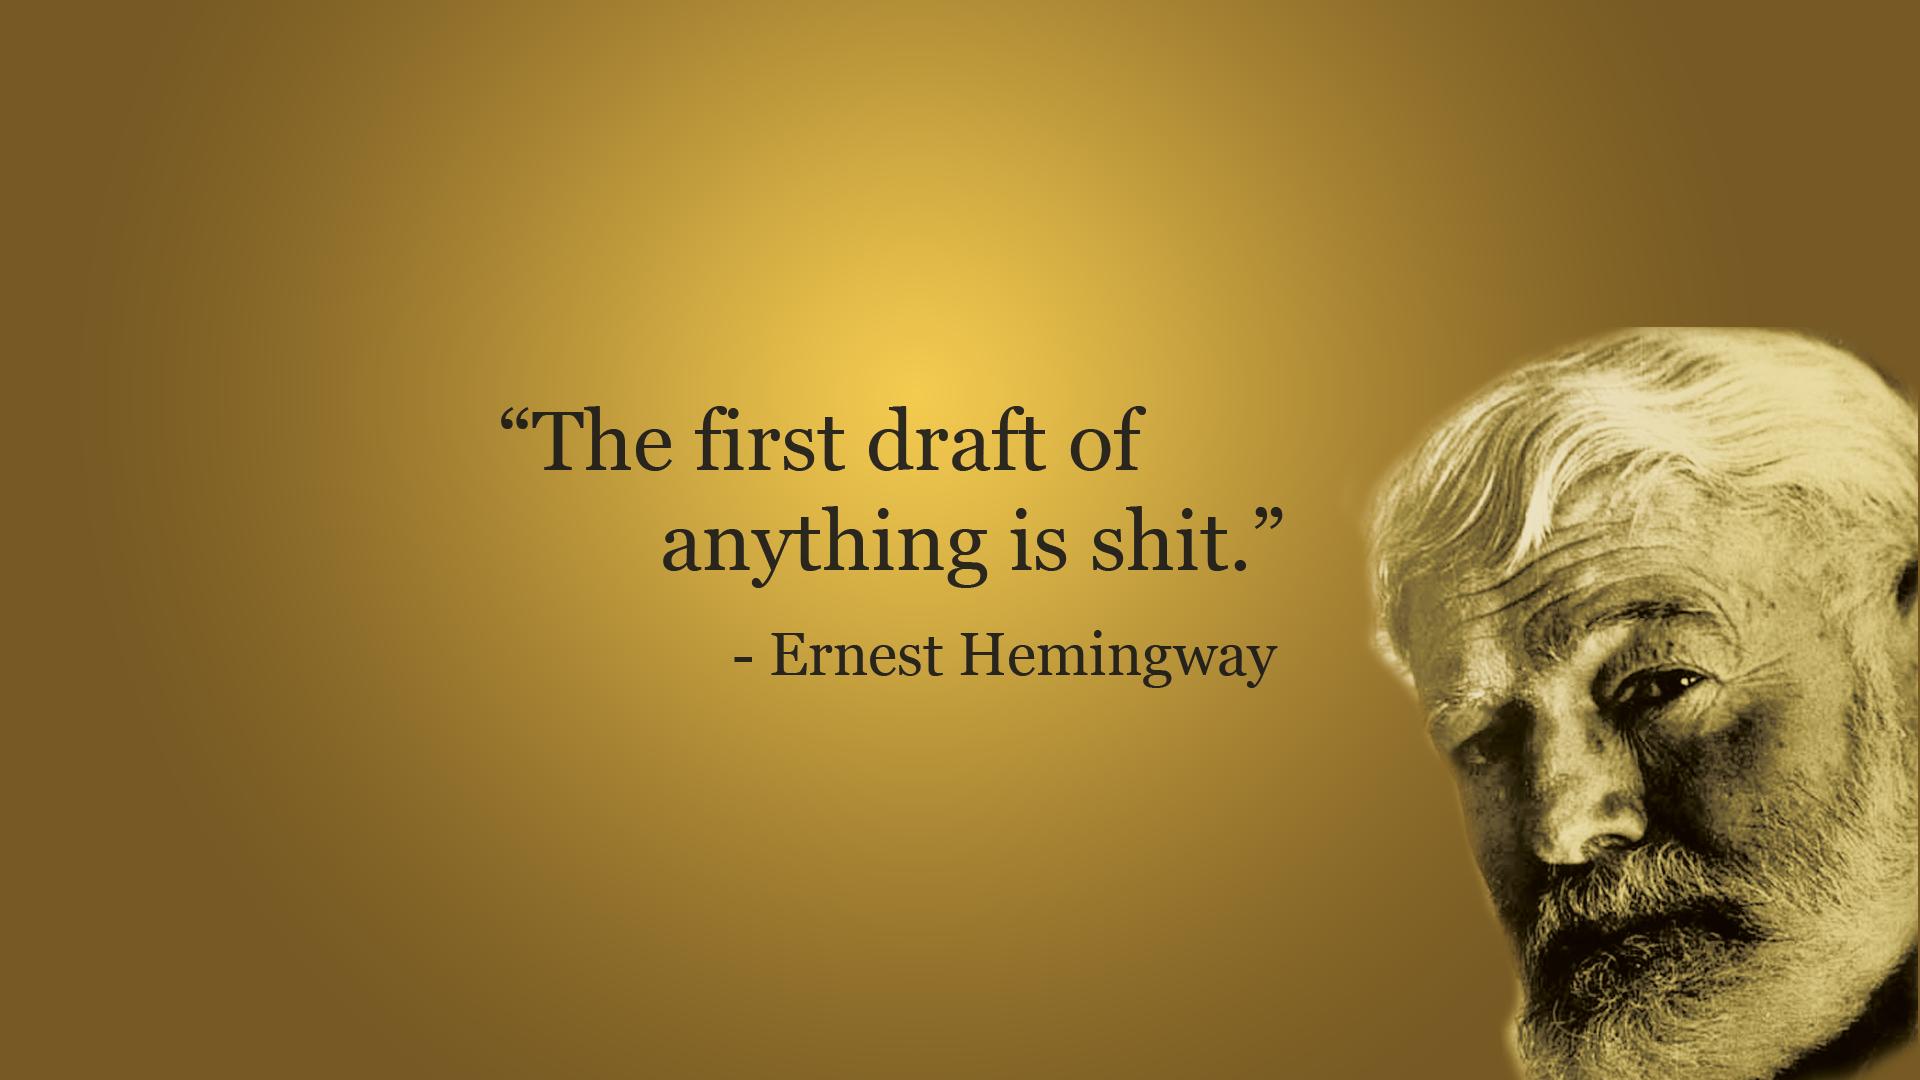 Saw a Hemingway quote I liked. Made a simple wallpaper 1920x1080